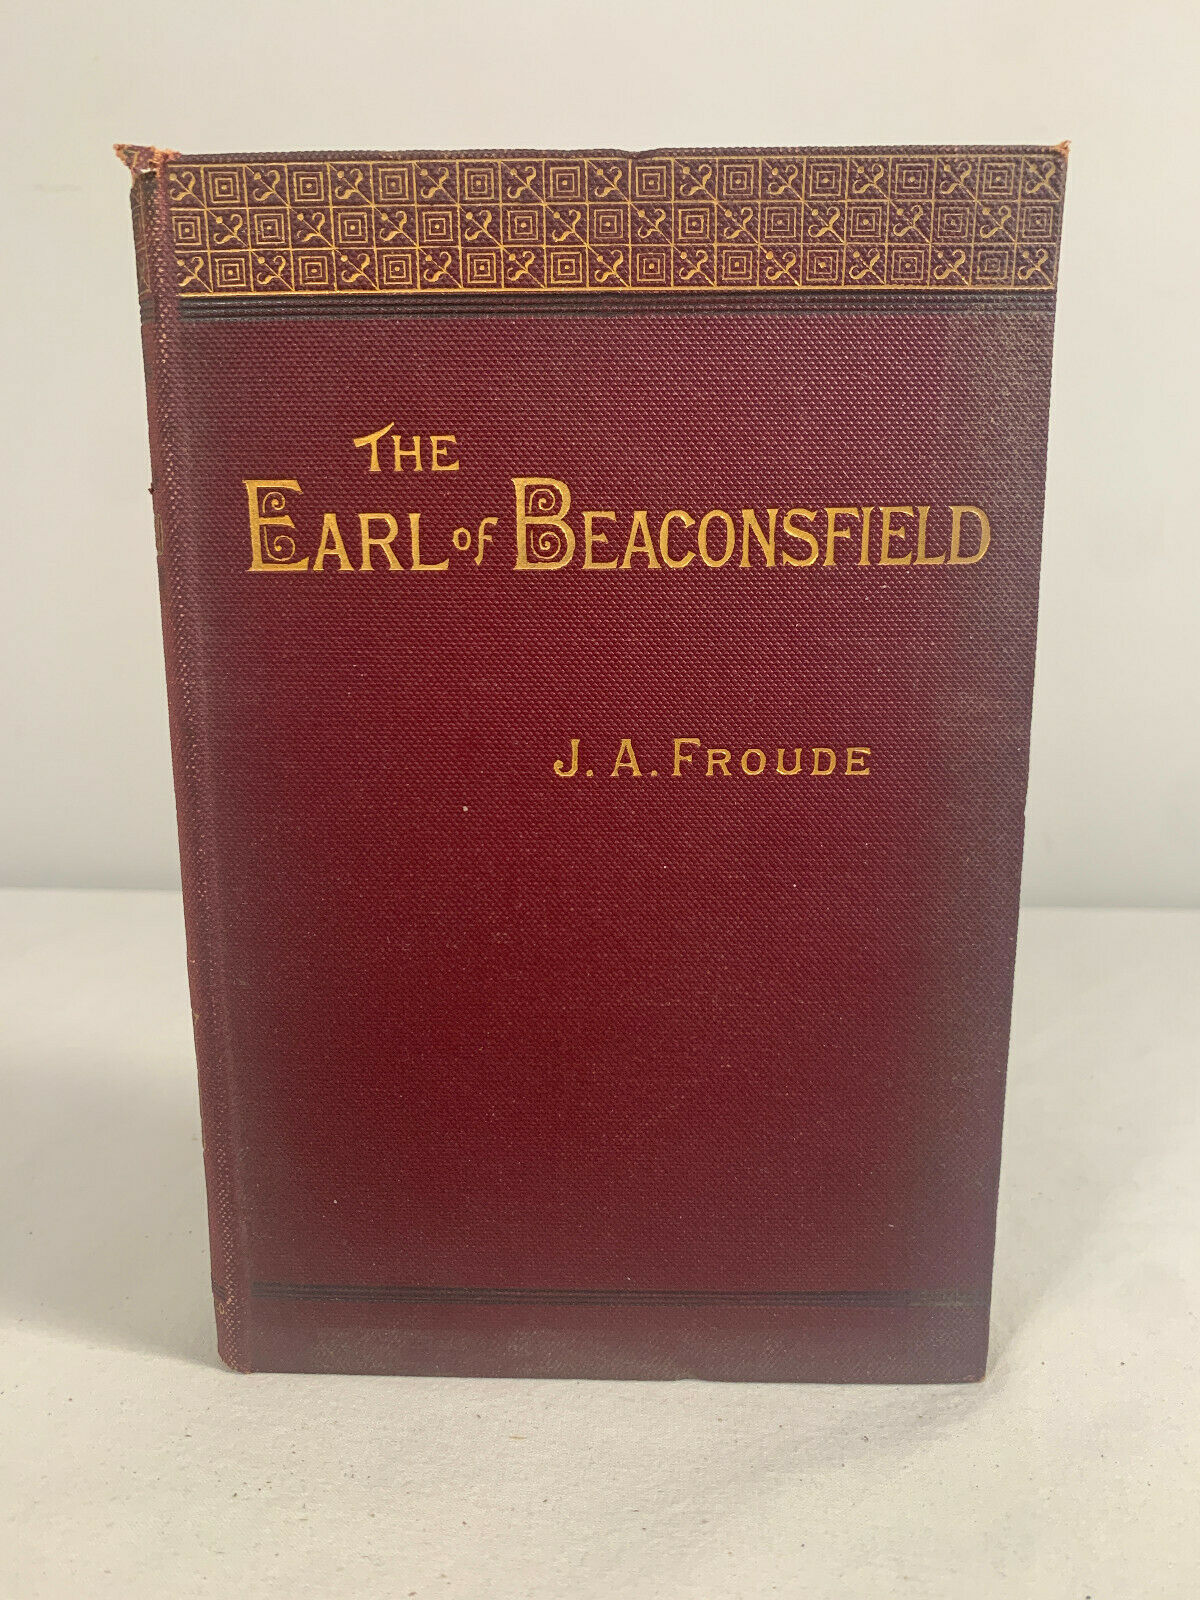 The Earl of Beaconsfield J.A. Froude, Hardcover 1891 5th edition